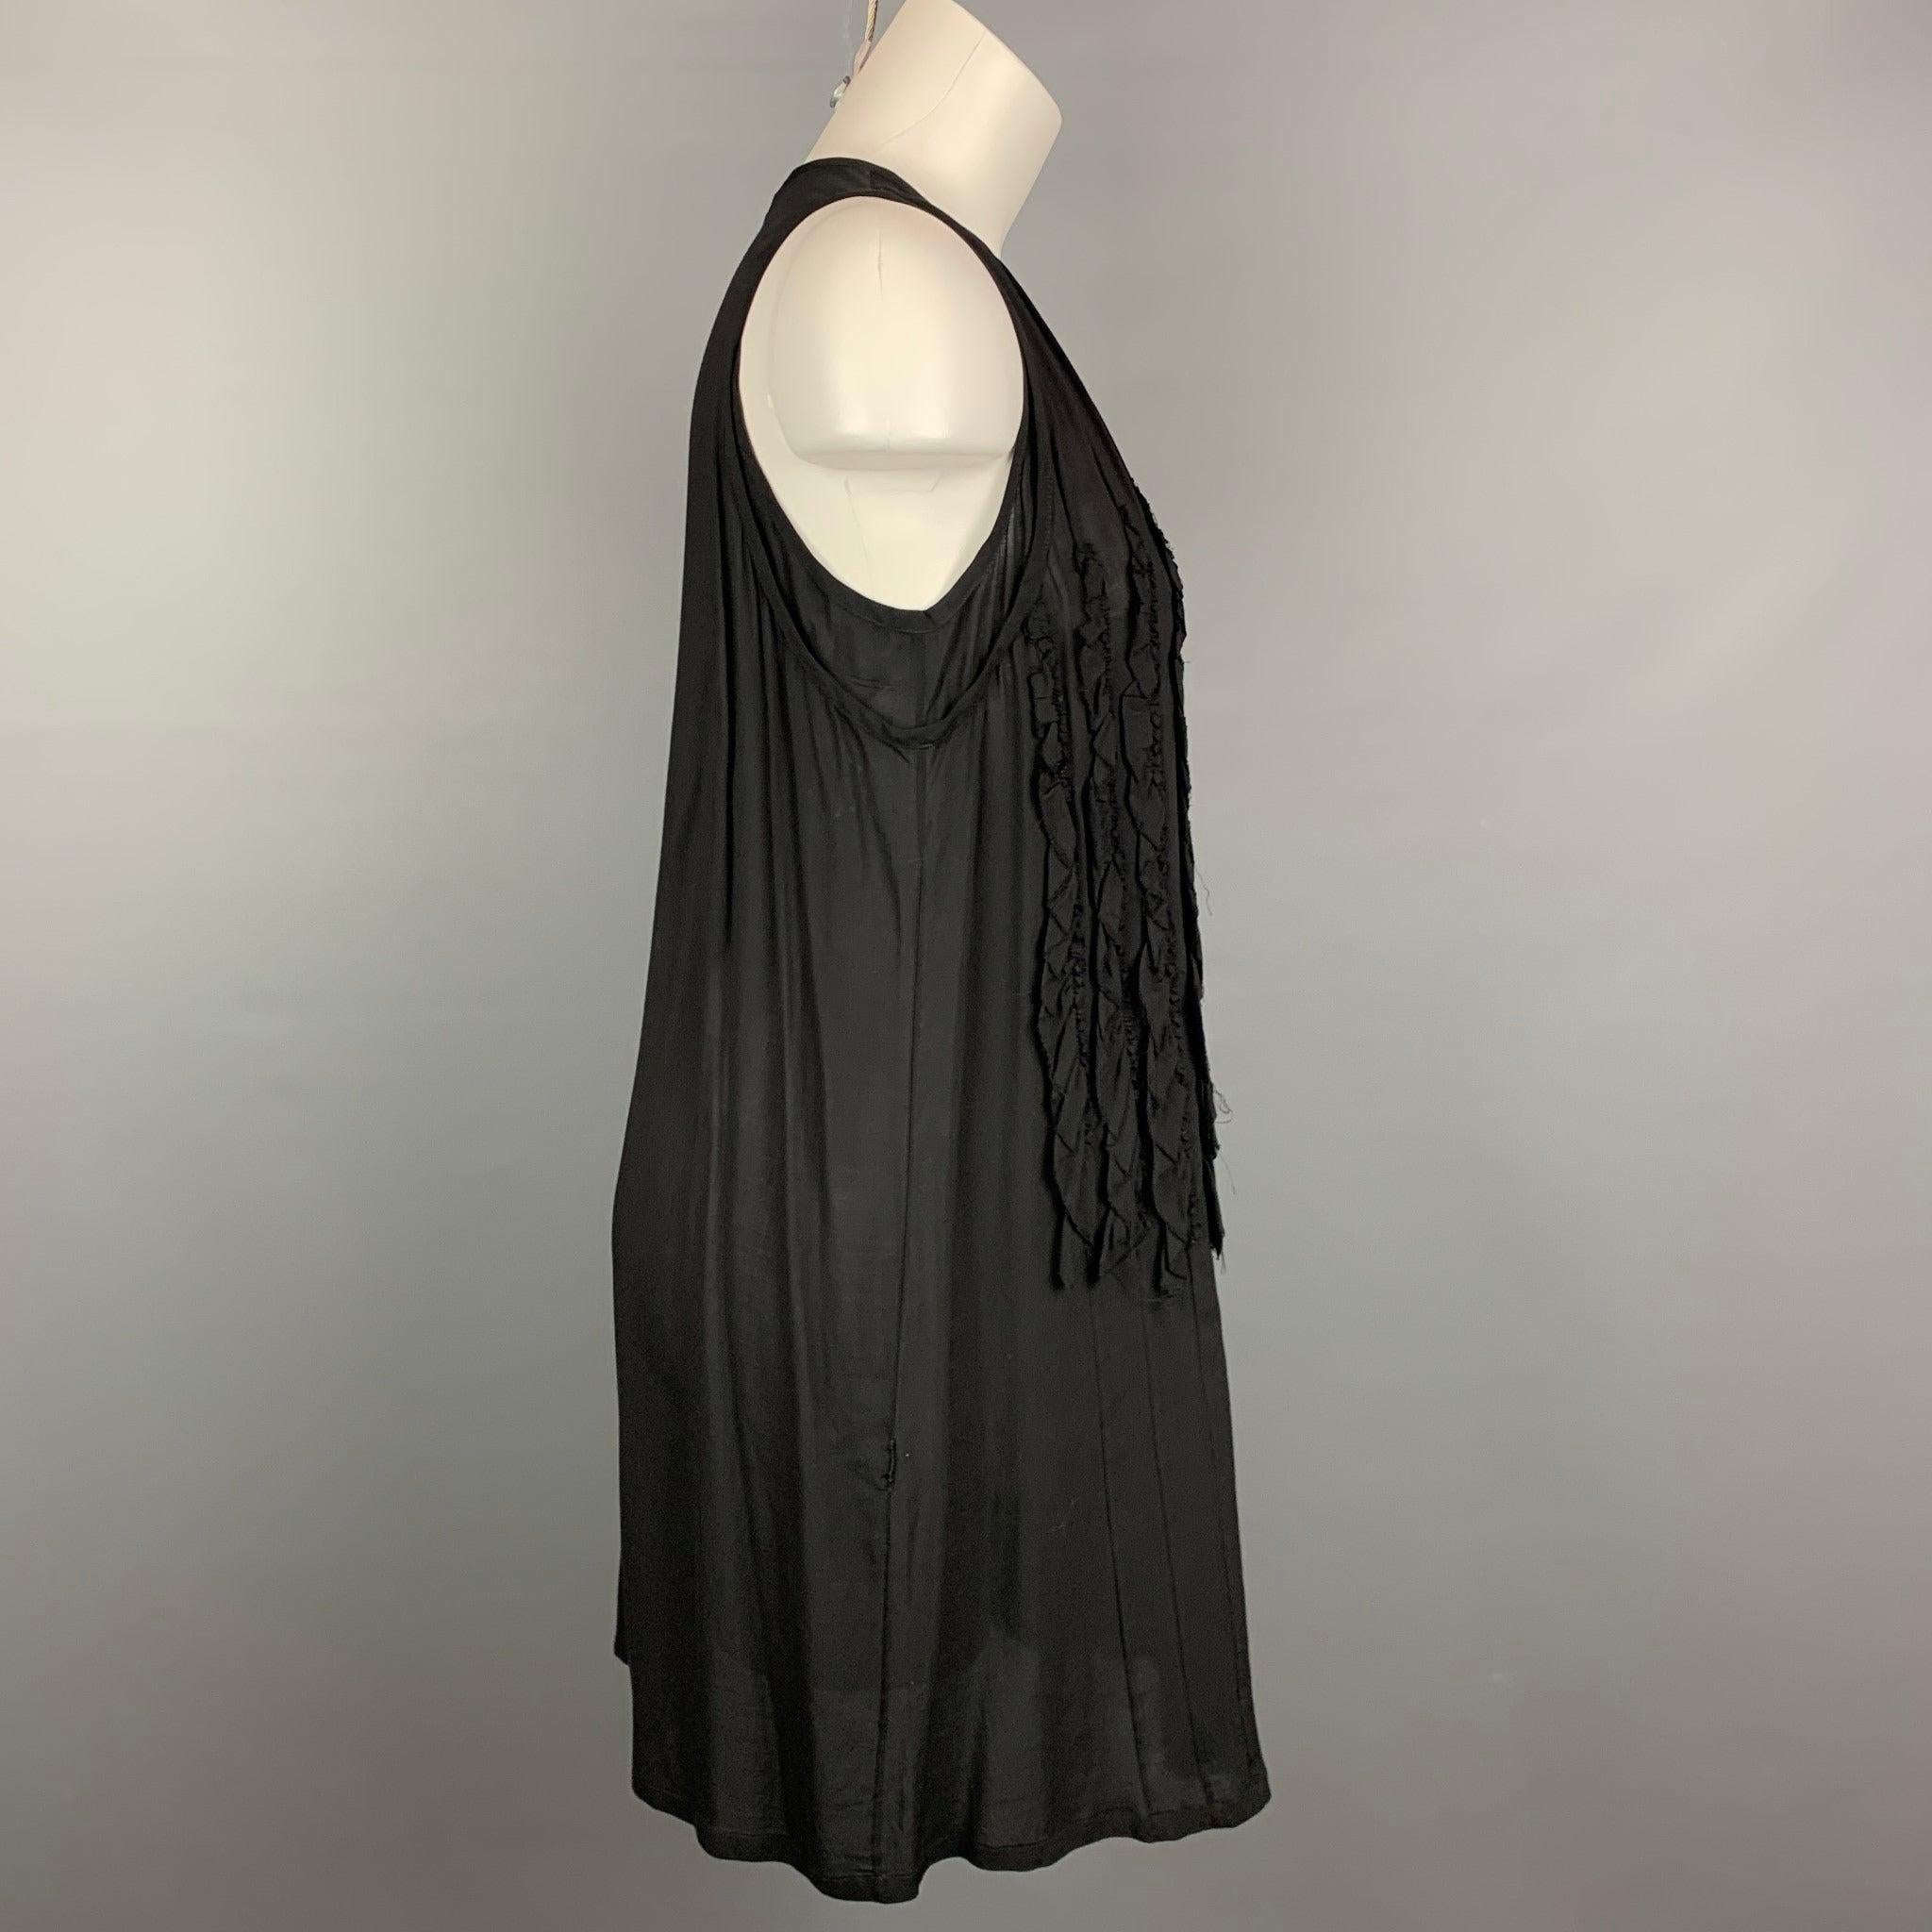 ANN DEMEULEMEESTER sleeveless dress comes in a black sheer material with a front ruffled design featuring a shift style.Very Good
Pre-Owned Condition. 

Marked:   36 

Measurements: 
  Bust: 36 inches  Hip: 42 inches Length: 33.5 inches 
  
  
